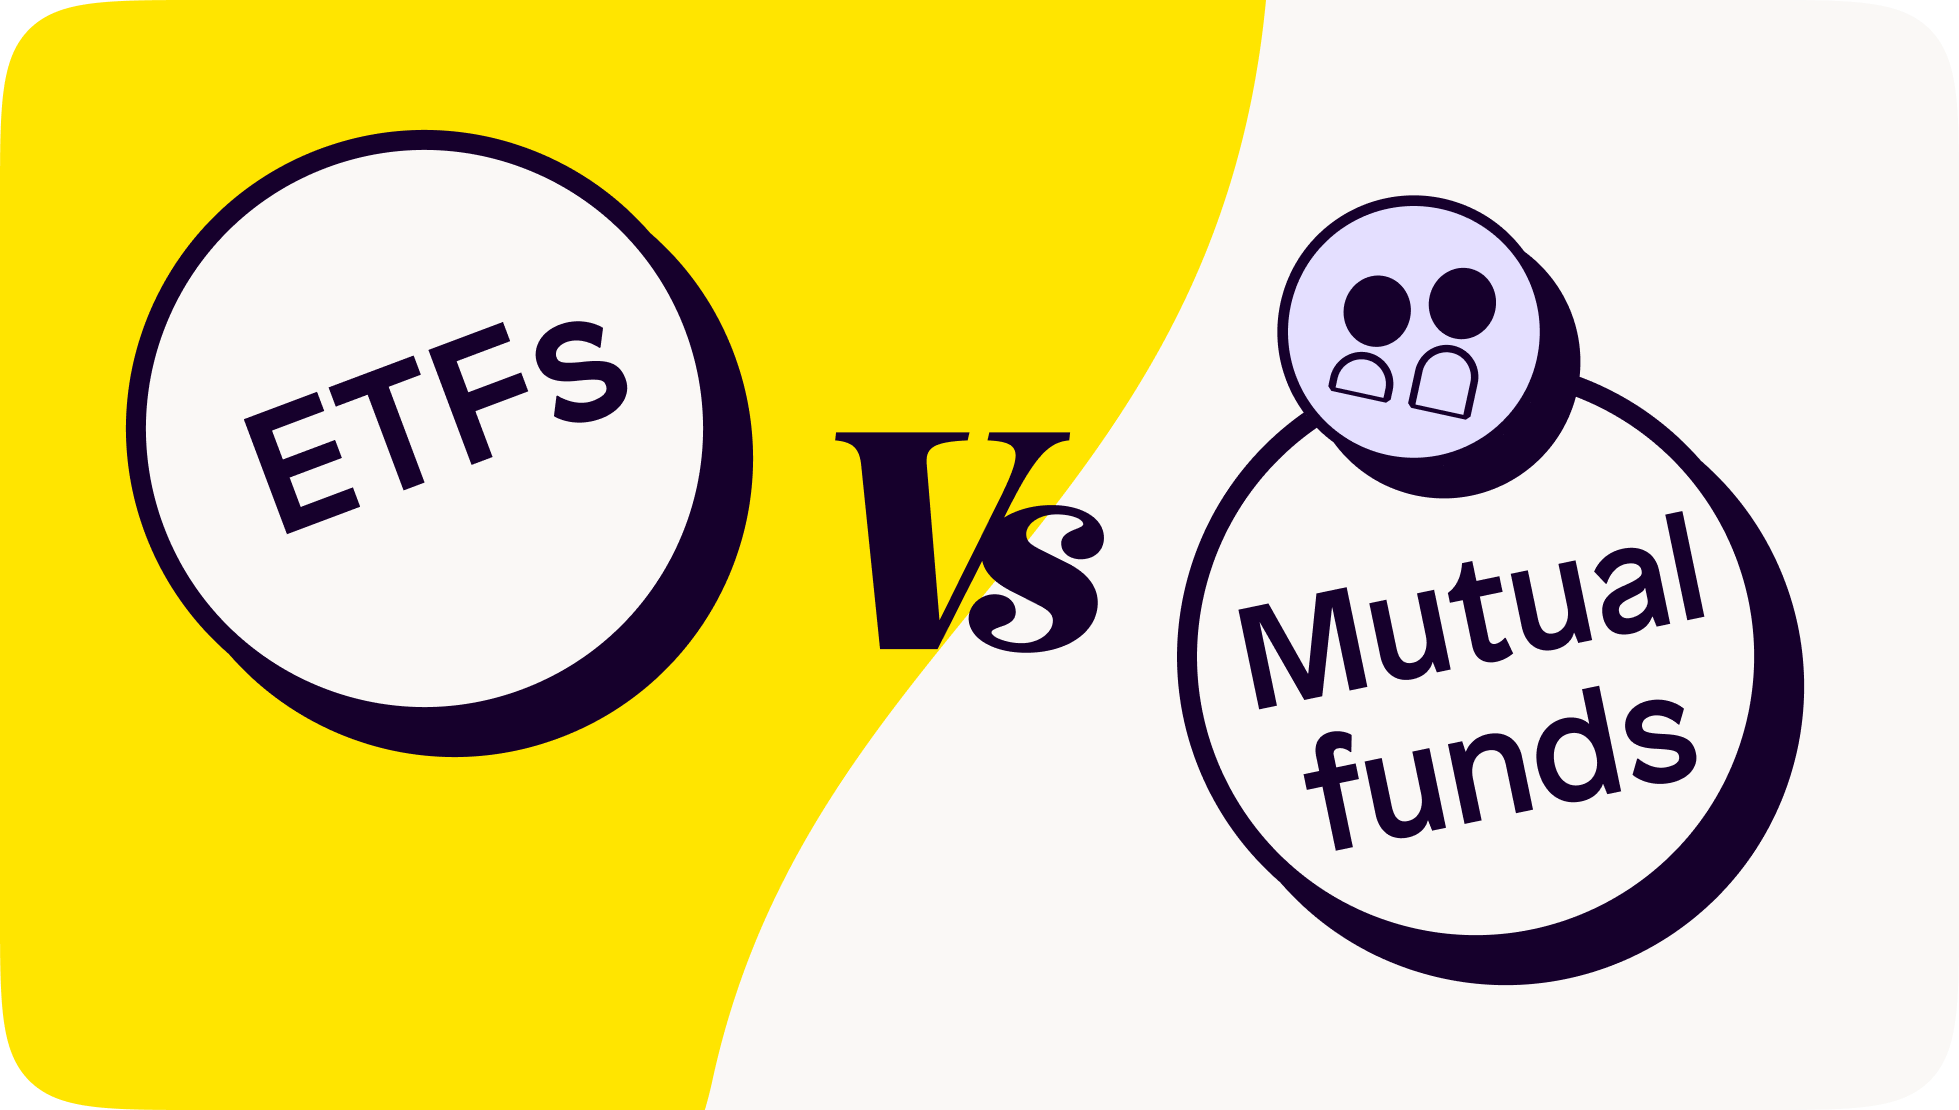 What's the difference between ETFs and mutual funds?